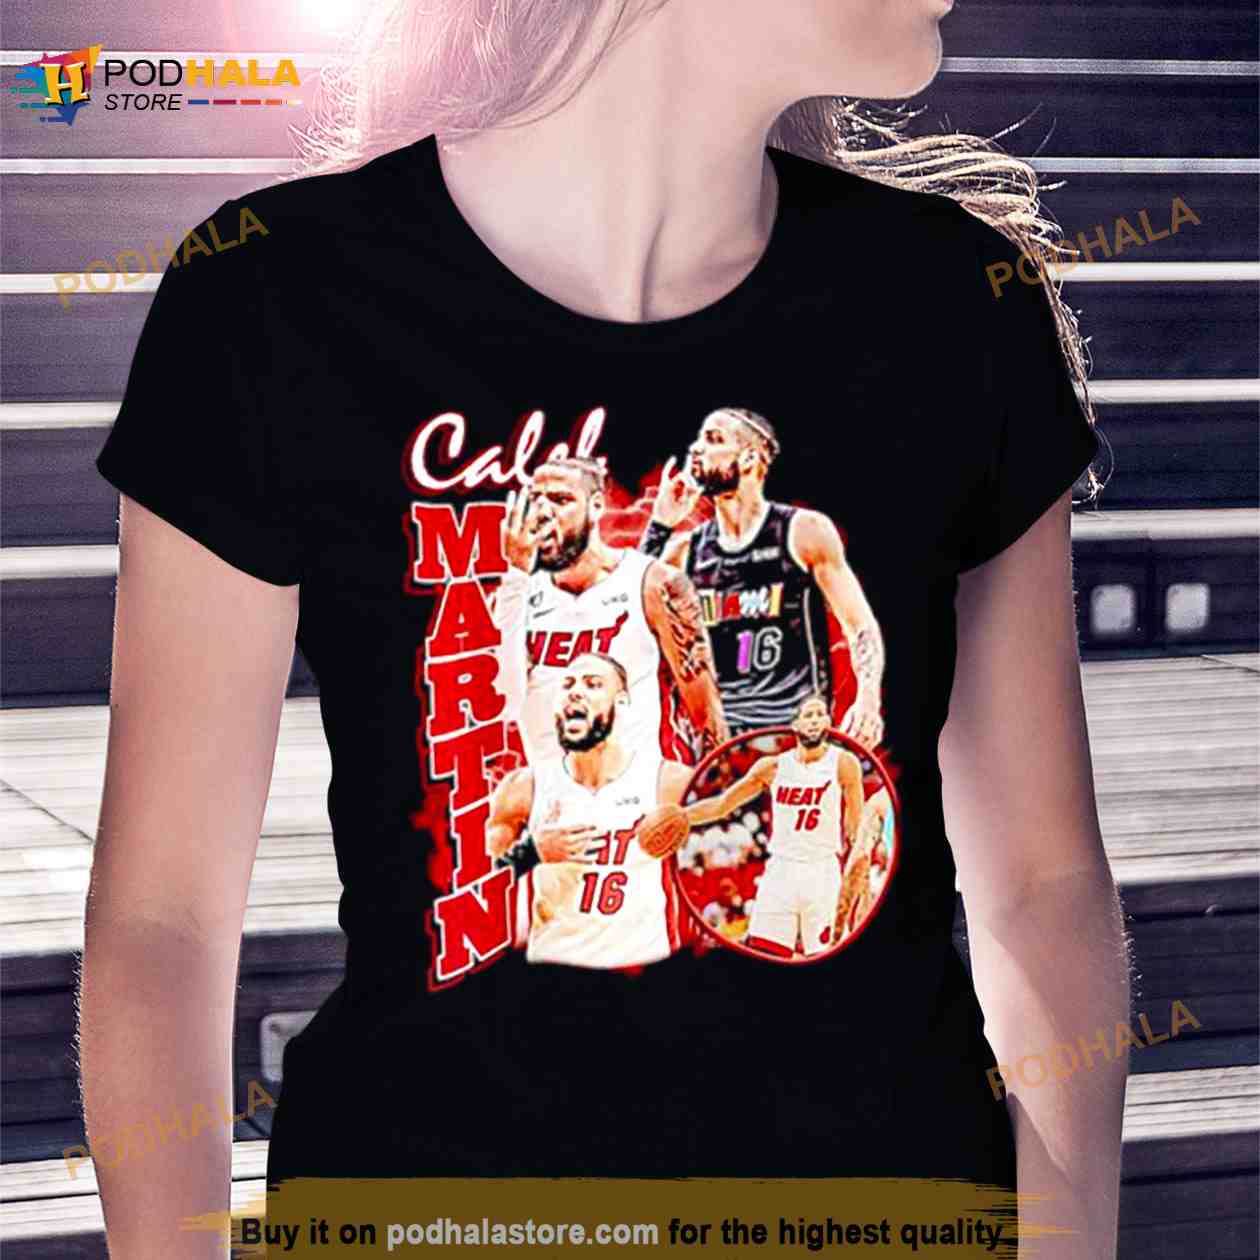 Caleb Martin Miami Heat Shirt - Bring Your Ideas, Thoughts And